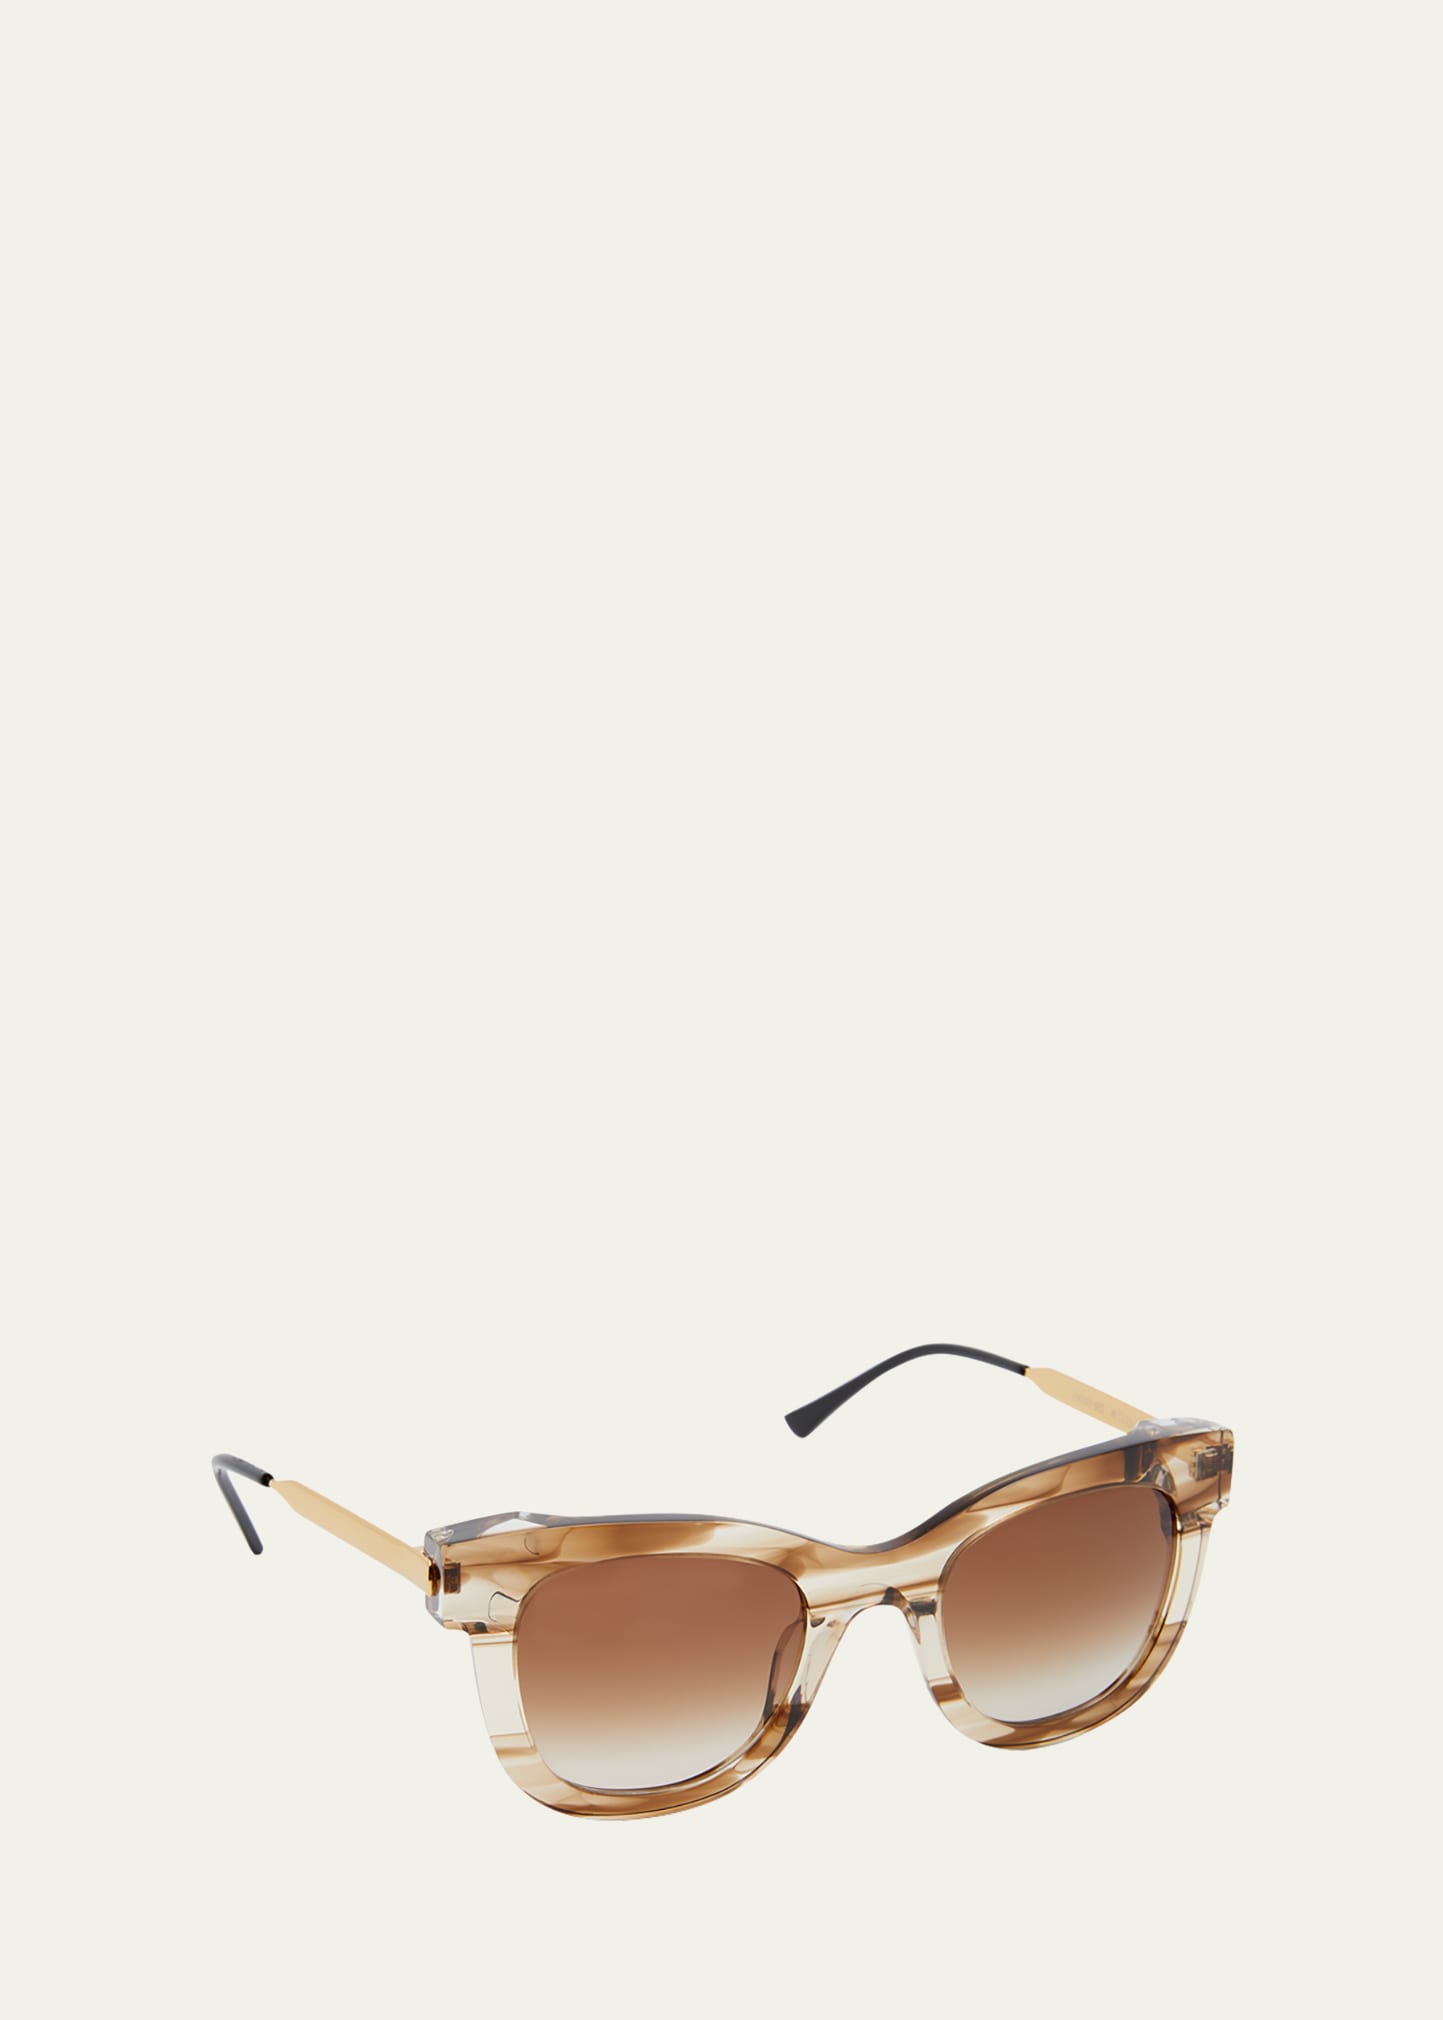 Thierry Lasry Sexxxy Square Beige-brown Acetate & Metal Sunglasses In Whtleobrn